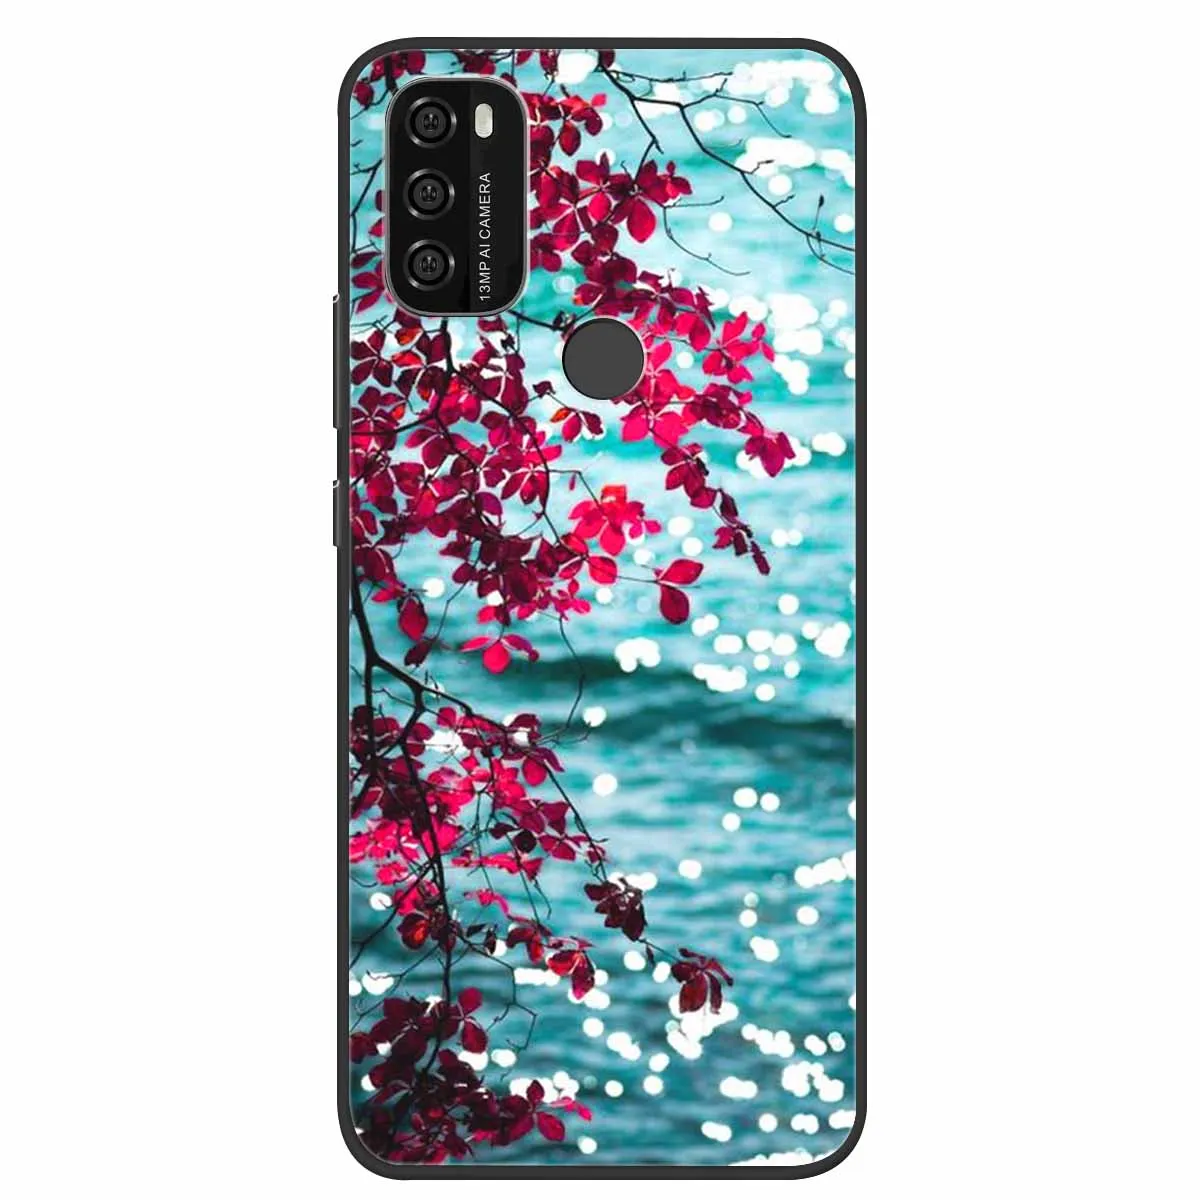 For Blackview A70 Case Luxury Bumper Silicone TPU Soft Cover Phone Case For Blackview A 70 Shockproof Cute Case Fundas Coque neck pouch for phone Cases & Covers